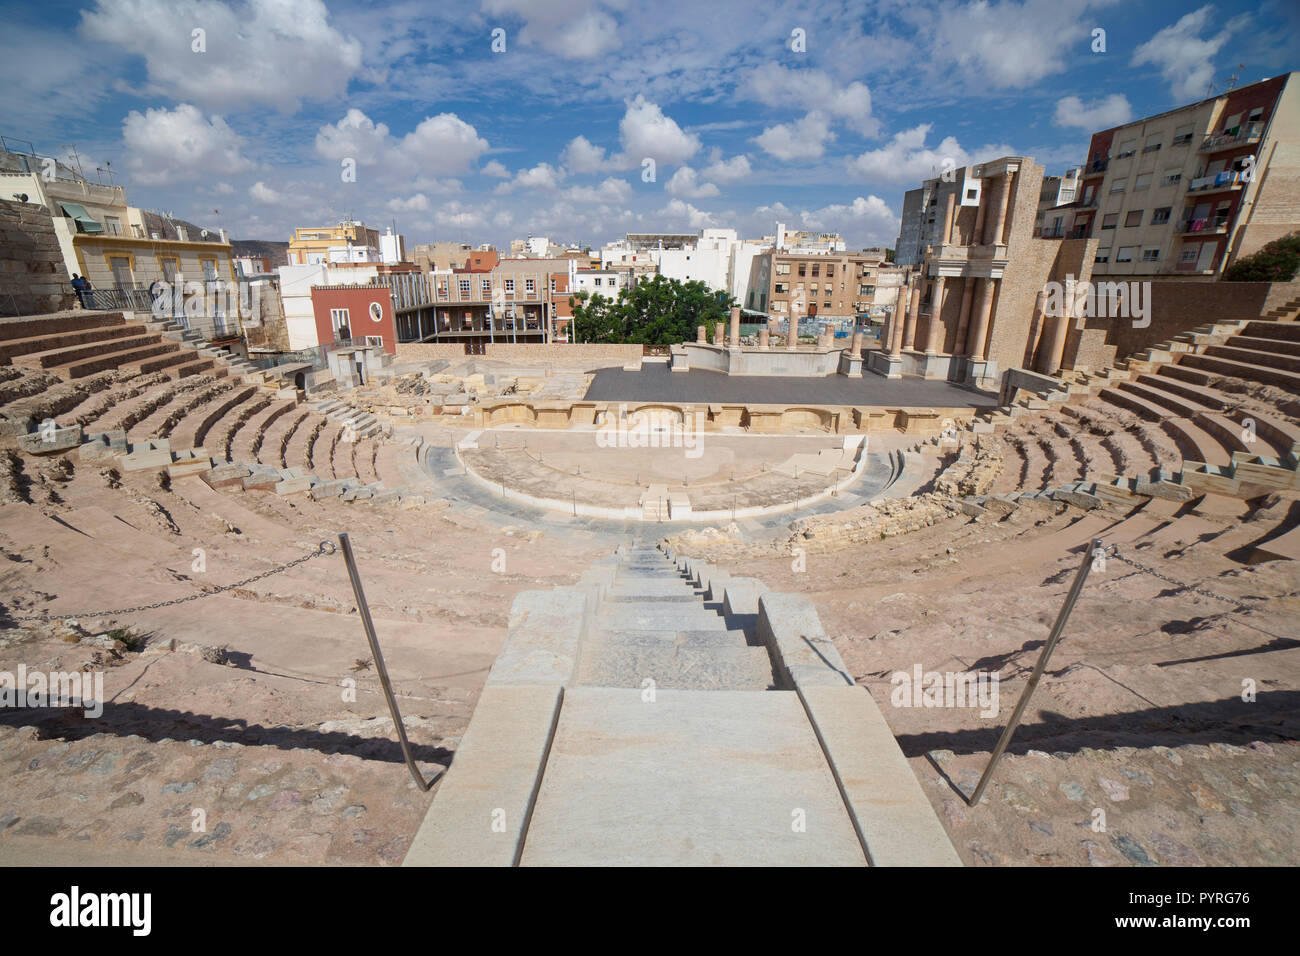 Overview of the stage and stands of Roman Theater of Cartagena city in Spain Stock Photo